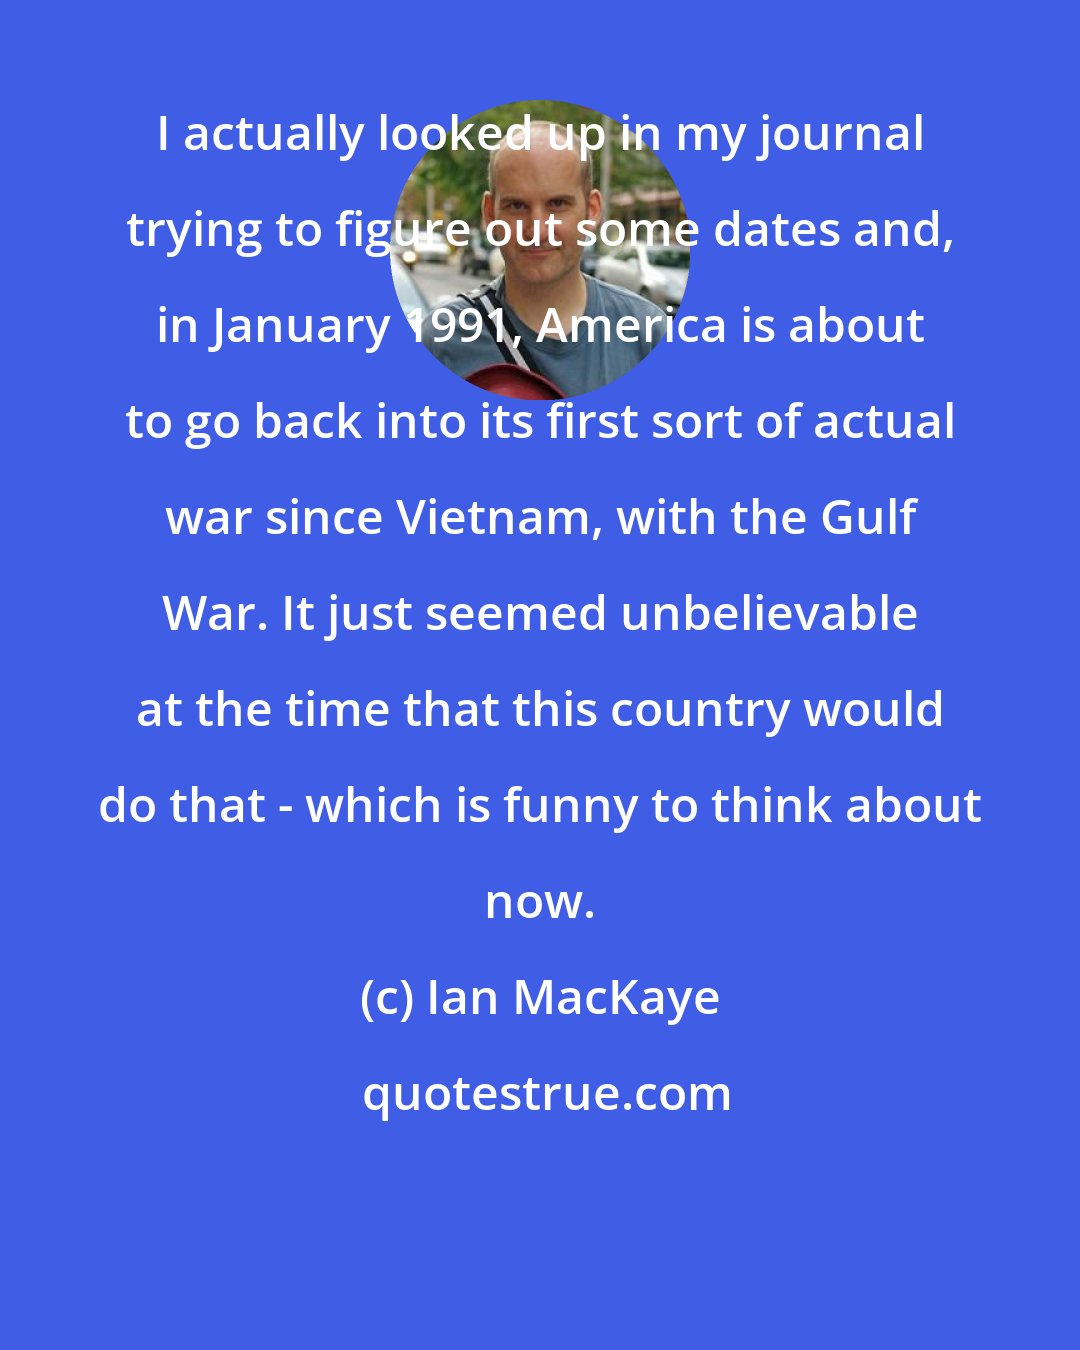 Ian MacKaye: I actually looked up in my journal trying to figure out some dates and, in January 1991, America is about to go back into its first sort of actual war since Vietnam, with the Gulf War. It just seemed unbelievable at the time that this country would do that - which is funny to think about now.